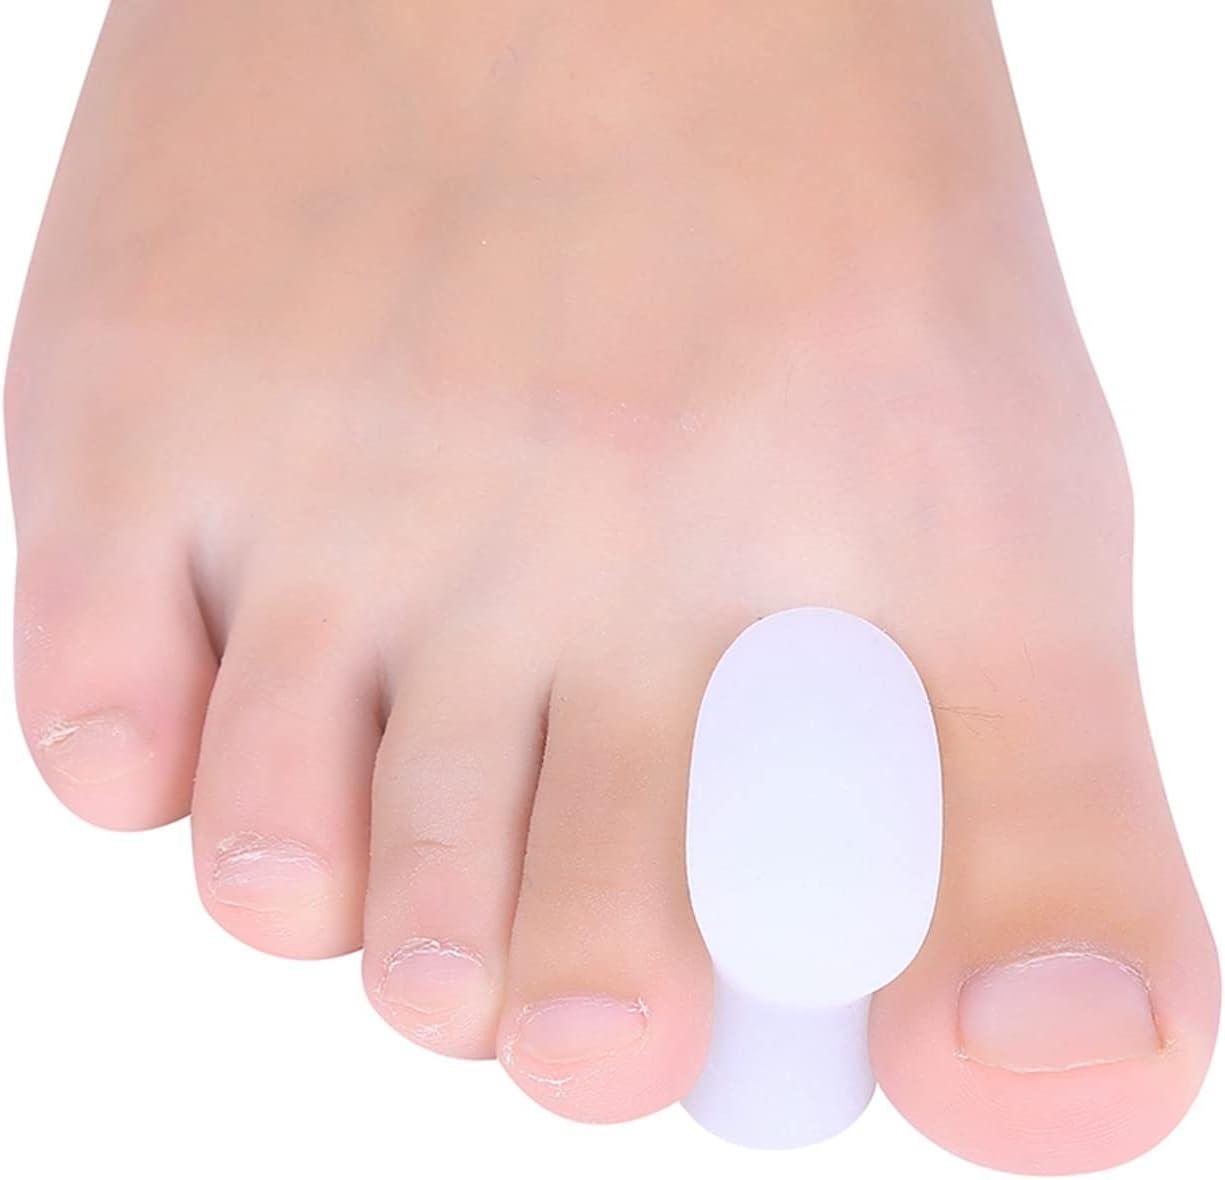 Life Goals  “Bunions” and toe spacers: How an orthotic can help